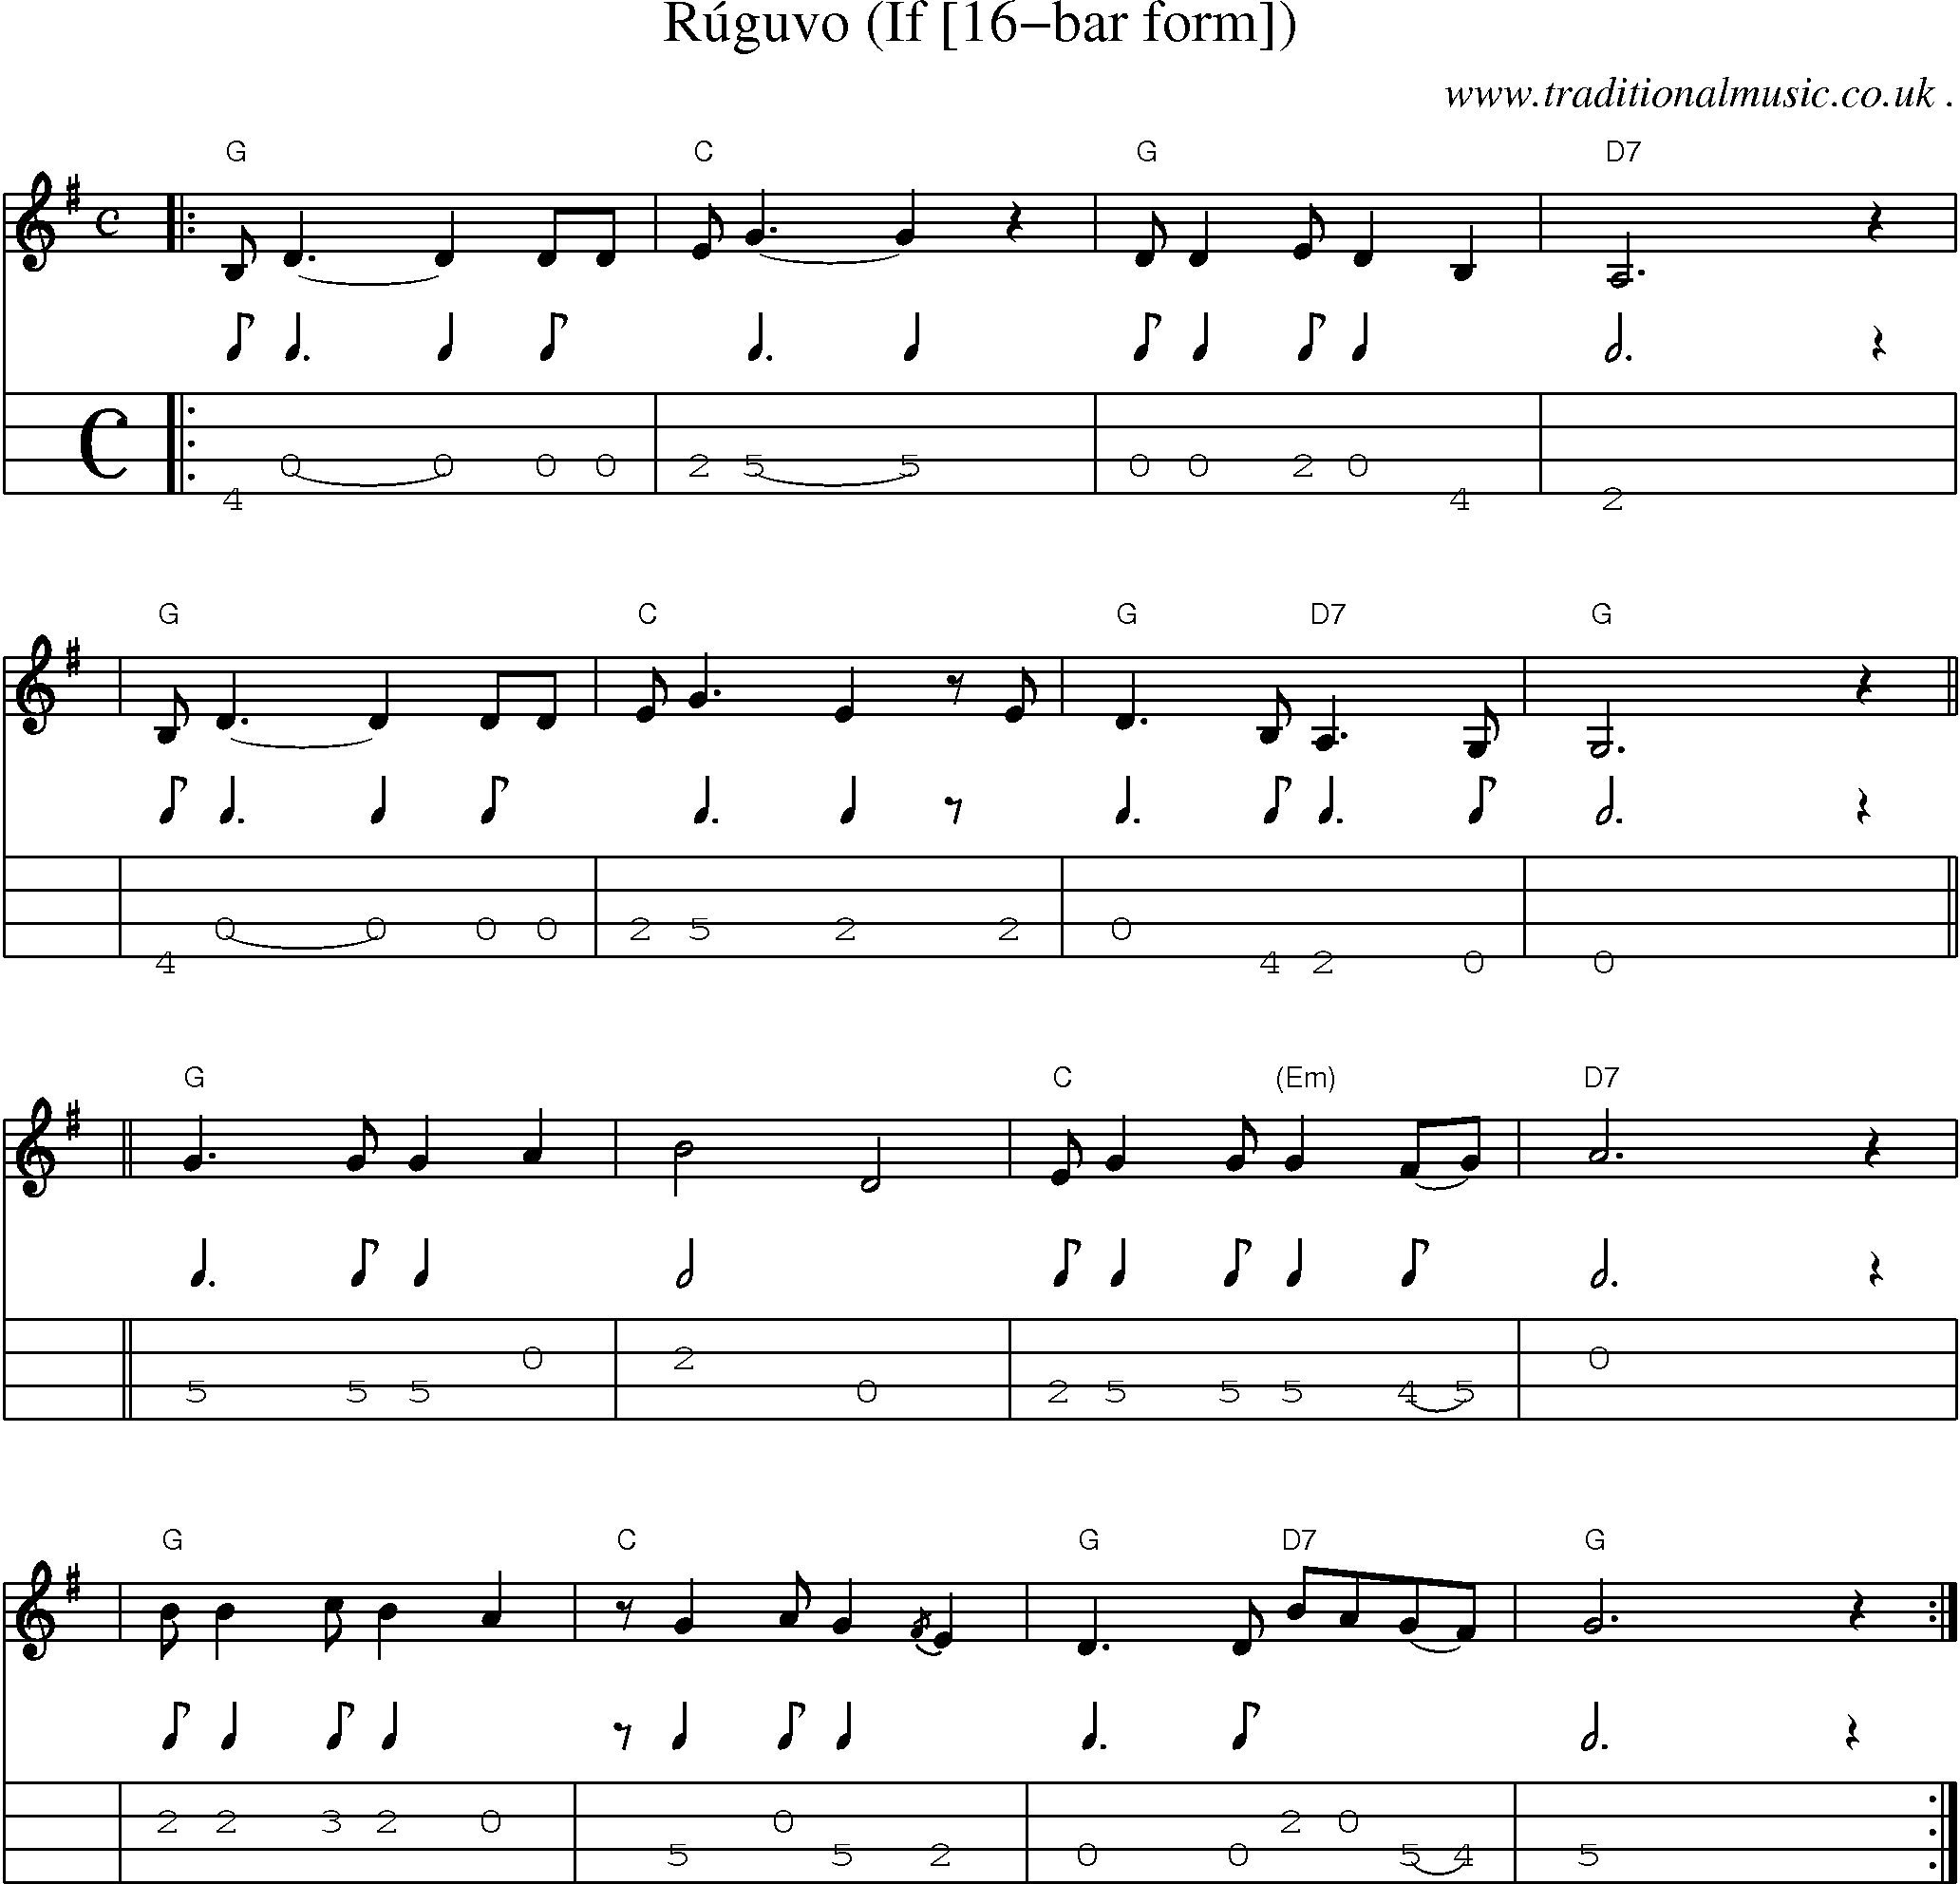 Sheet-music  score, Chords and Mandolin Tabs for Ruguvo If [16-bar Form]